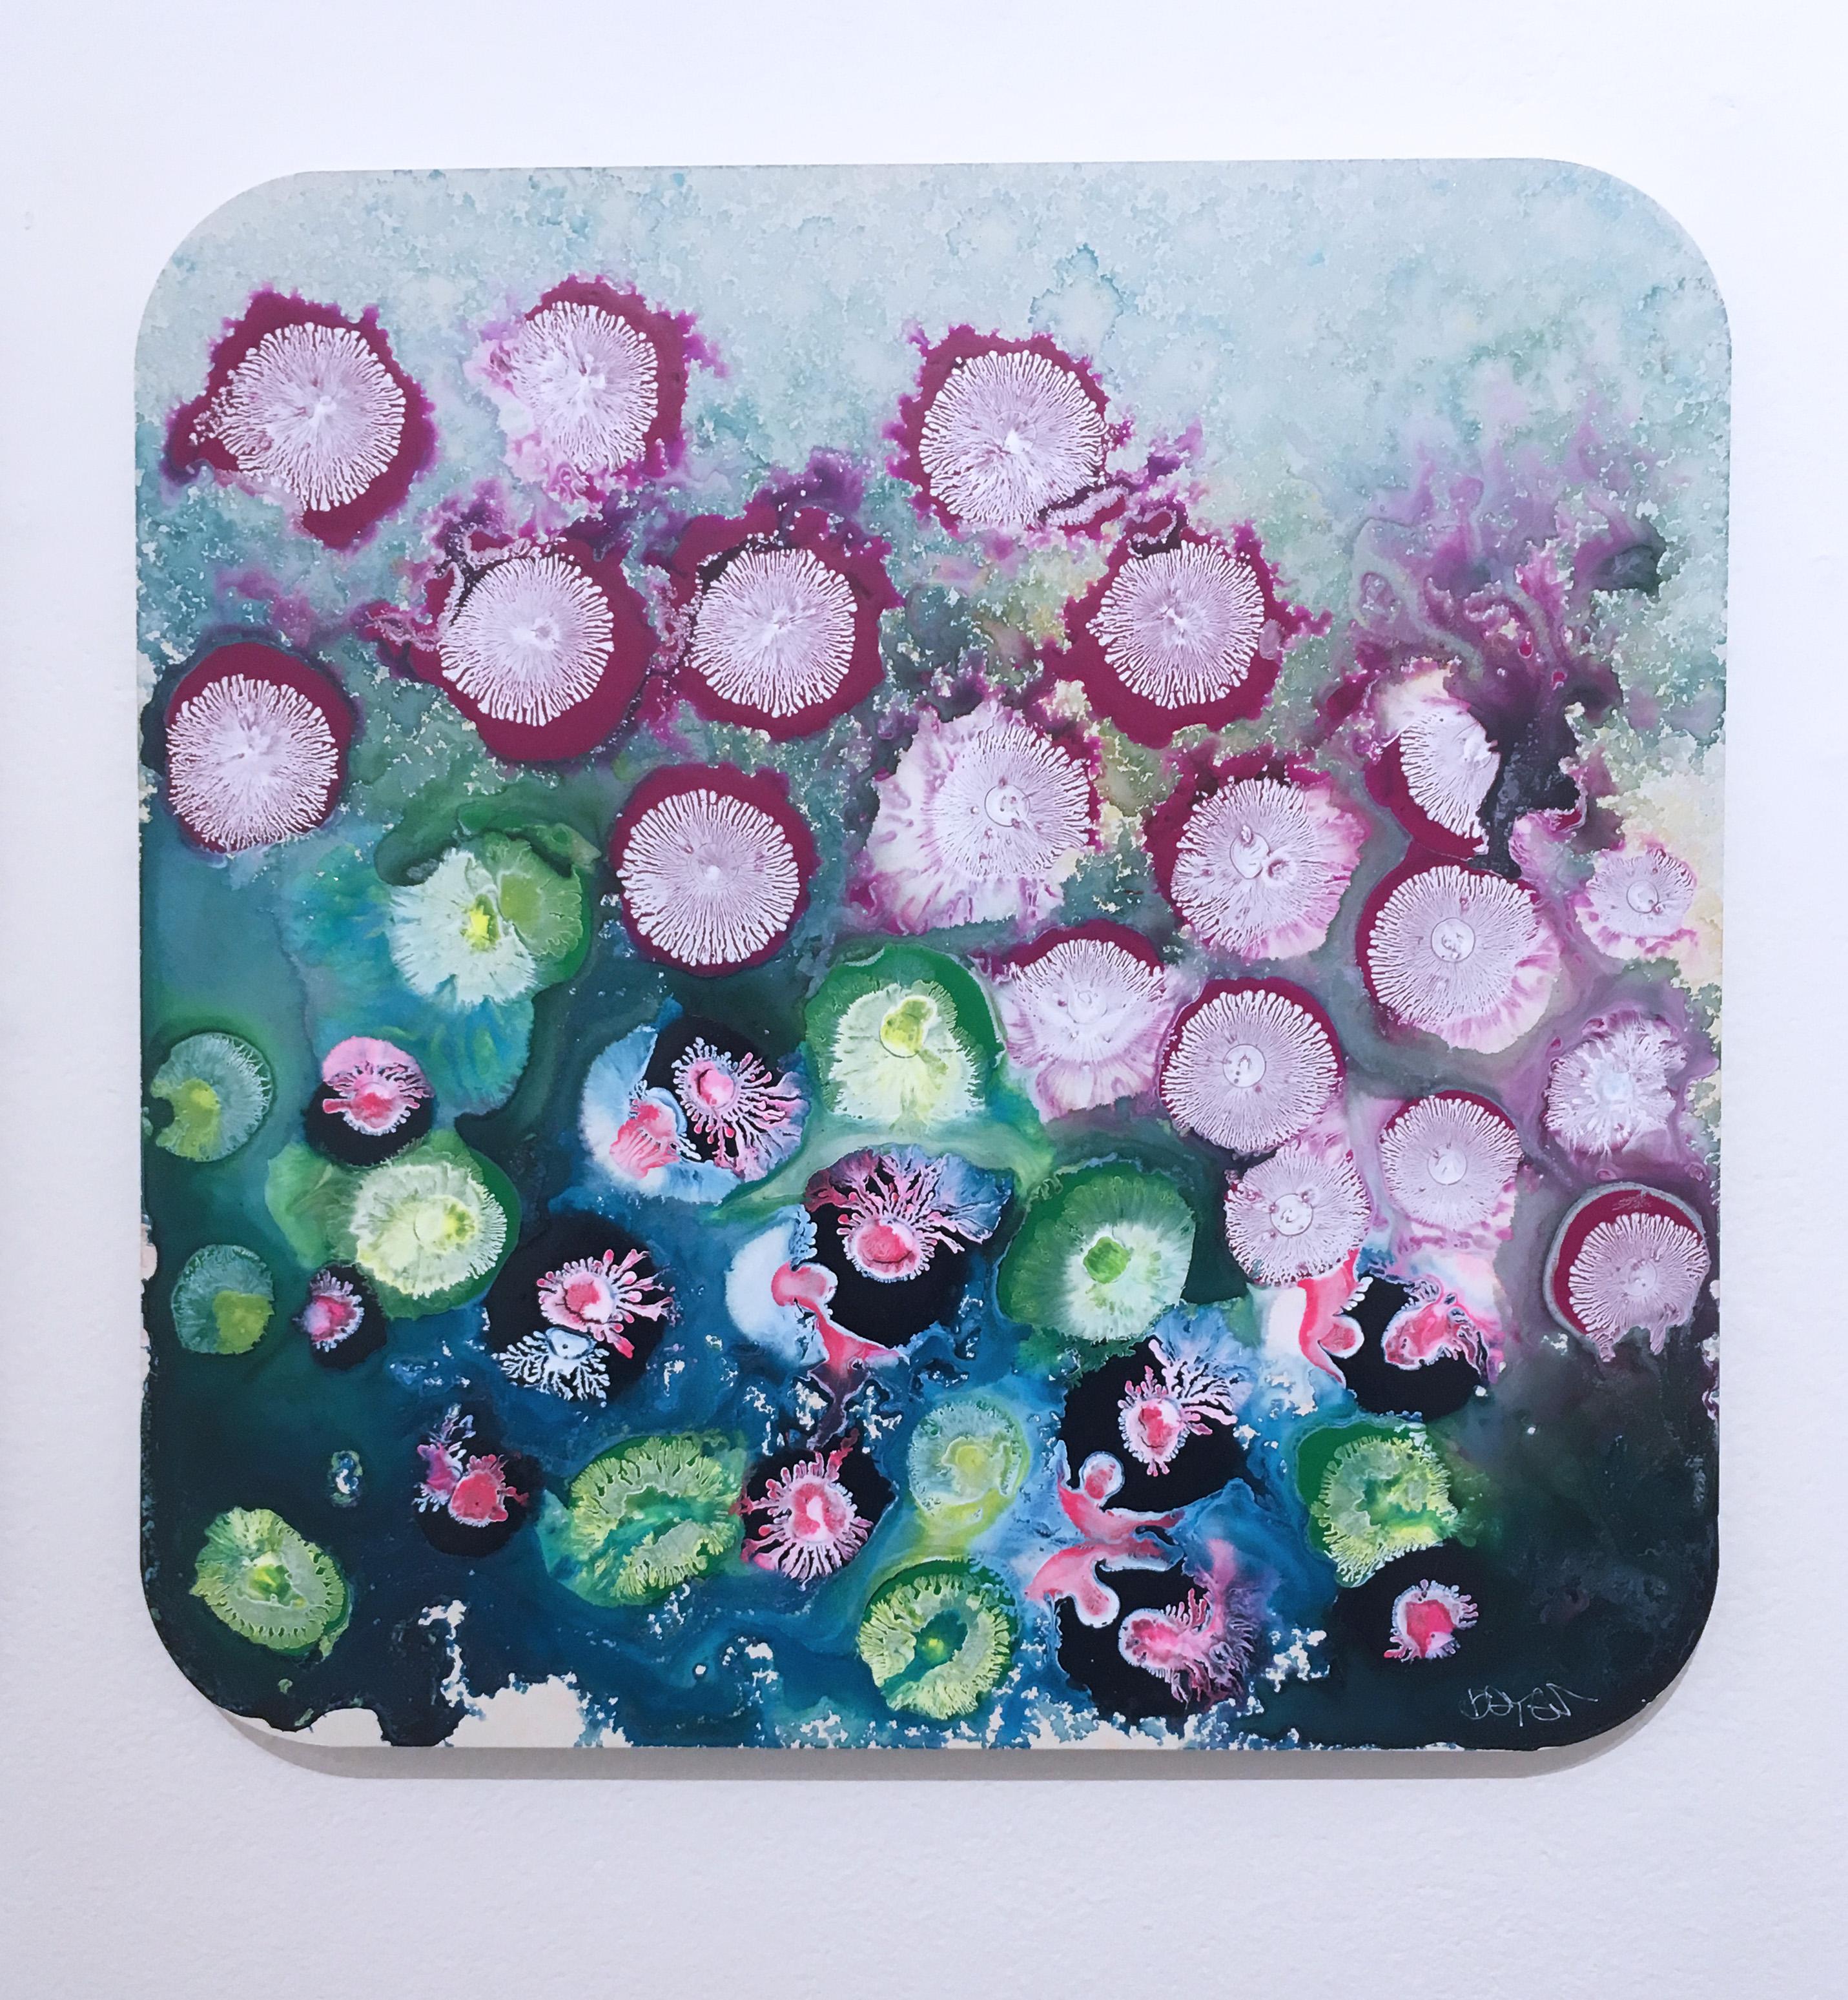 SOL 6 2018, figurative abstraction, floral, blue, purple, pink, green